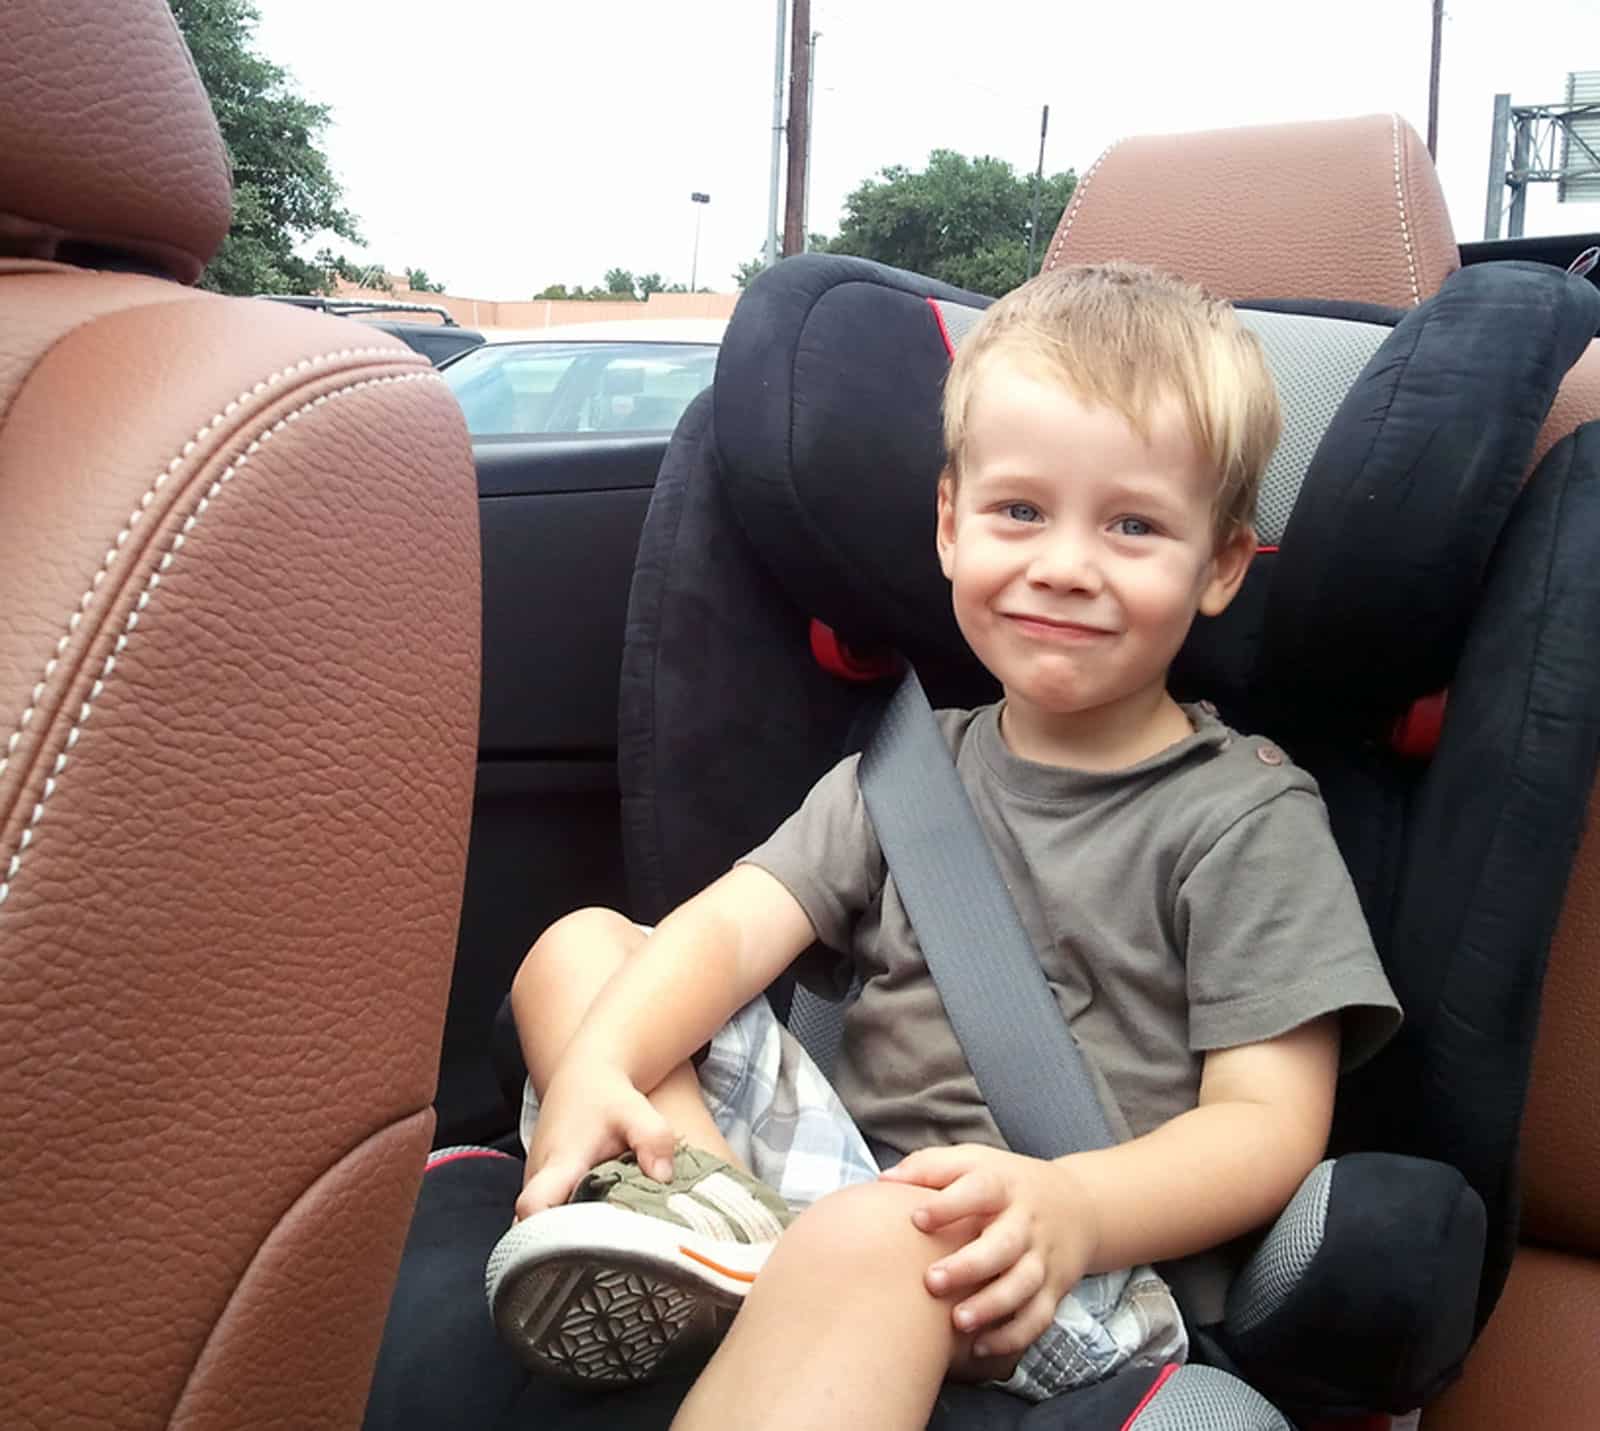 New state law will mandate booster seats for kids up to 8 years old ...